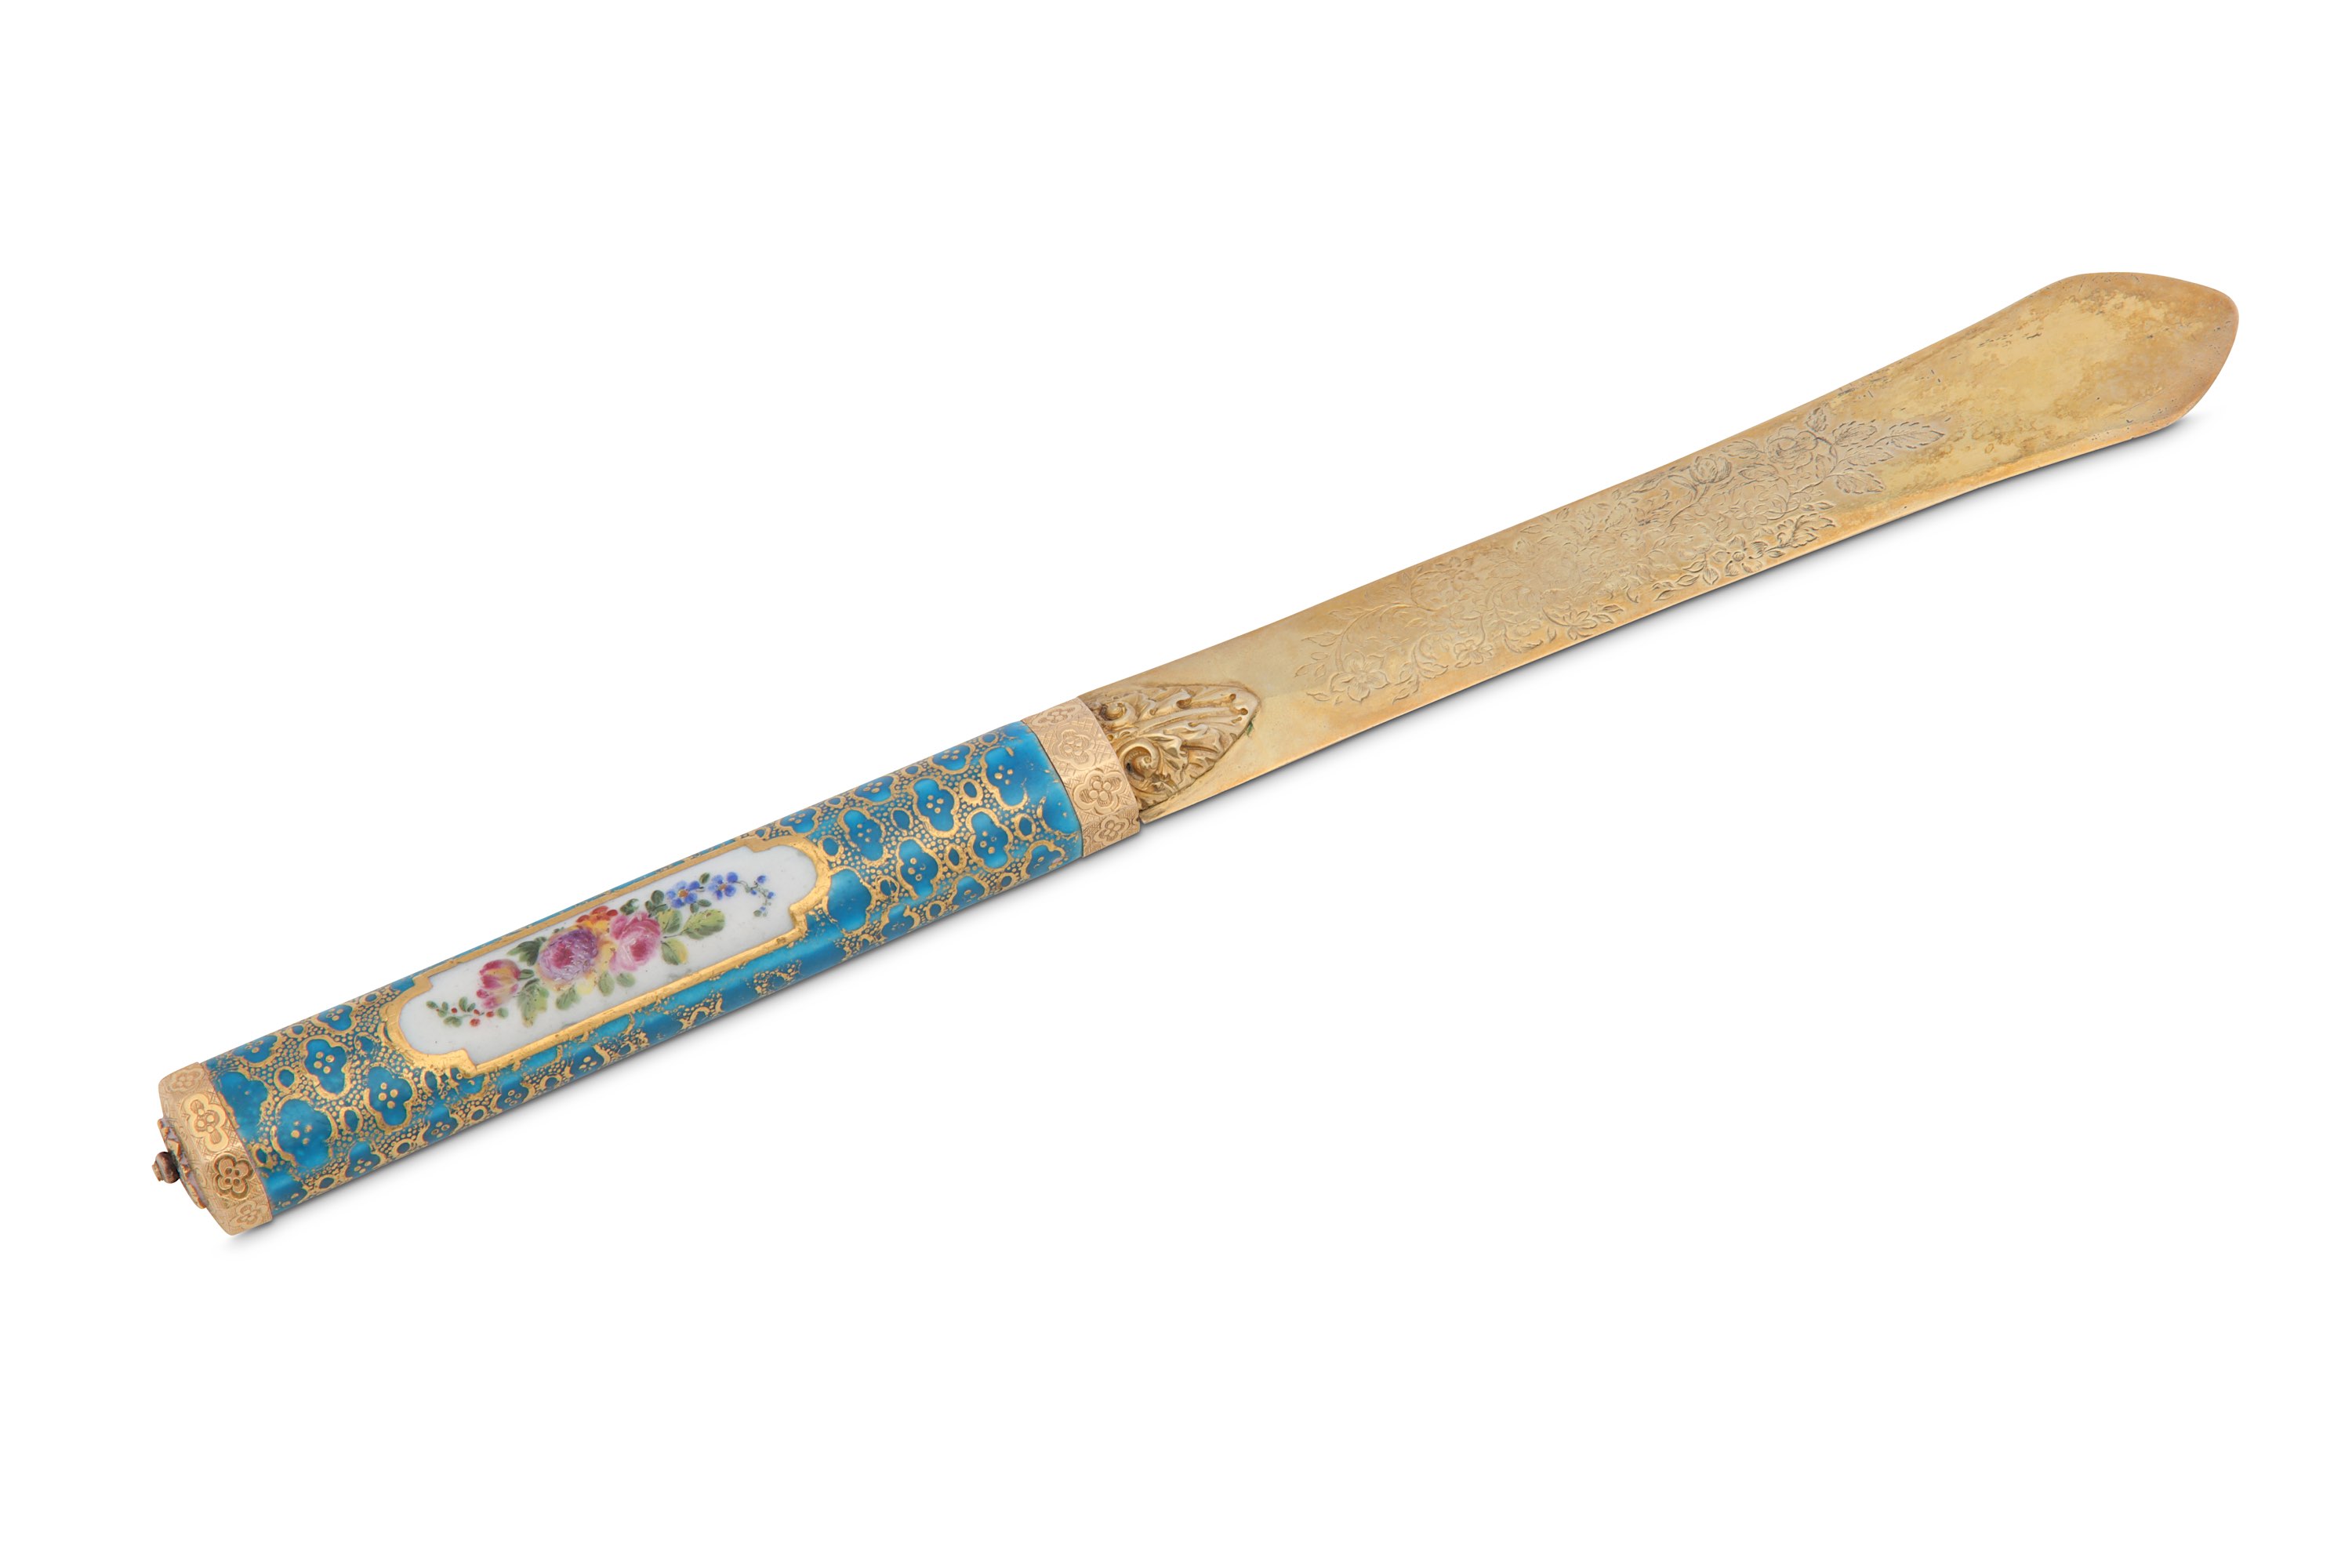 A silver-gilt paper knife, the blade London 1831, maker’s mark WC over DC, associated with a late 19